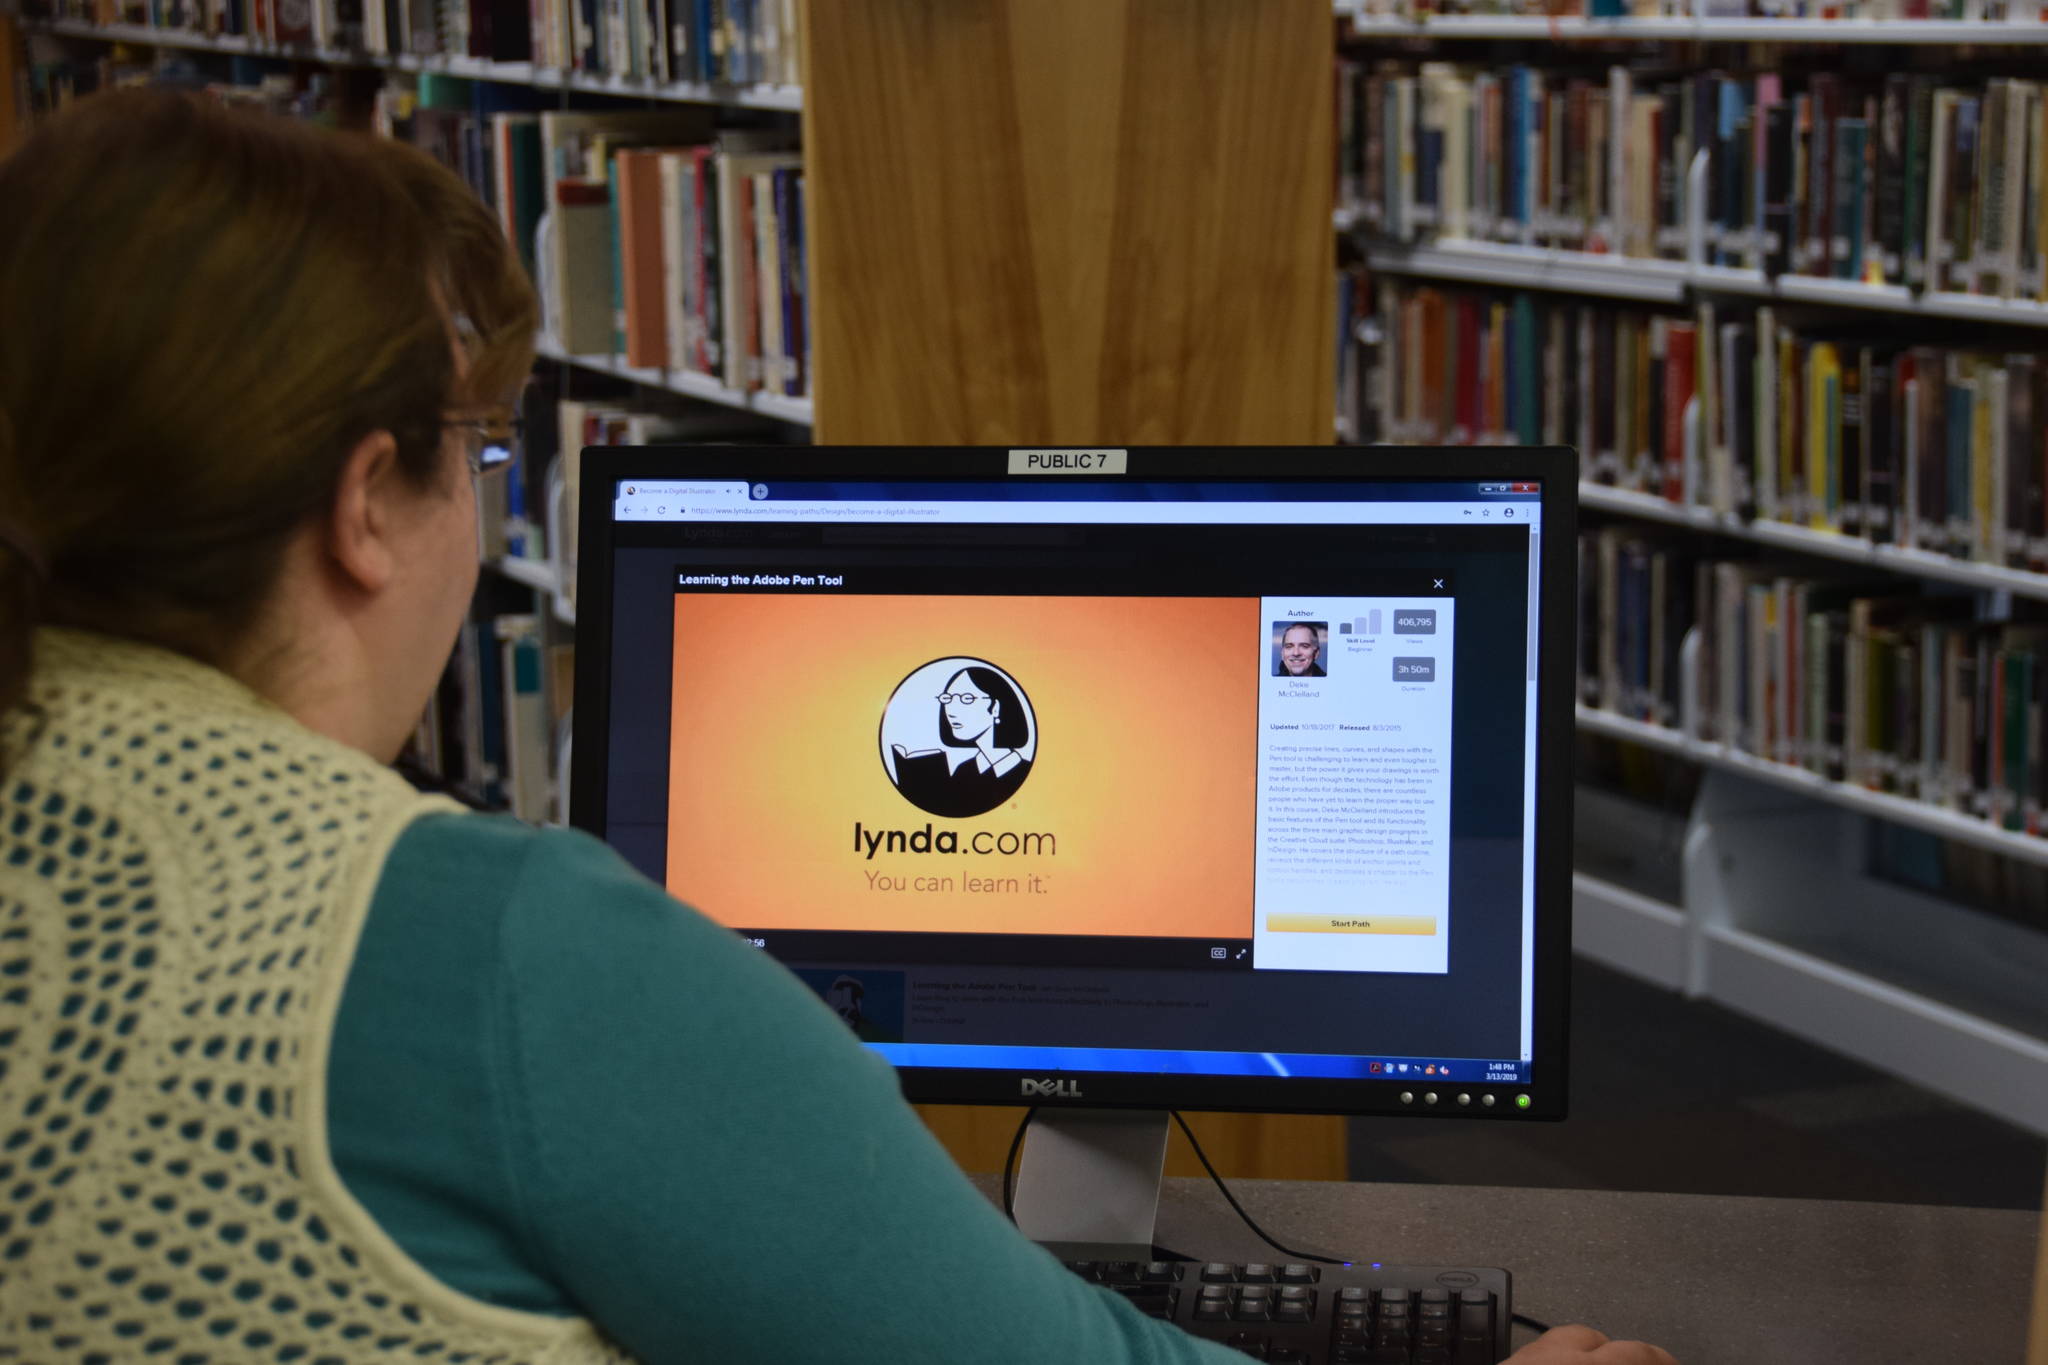 Kenai librarian Bethany McMilin demonstrates how to use Lynda.com, an online learning resource available for free through the public library system, at the Kenai Community Library on March 13, 2019. (Photo by Brian Mazurek/Peninsula Clarion)